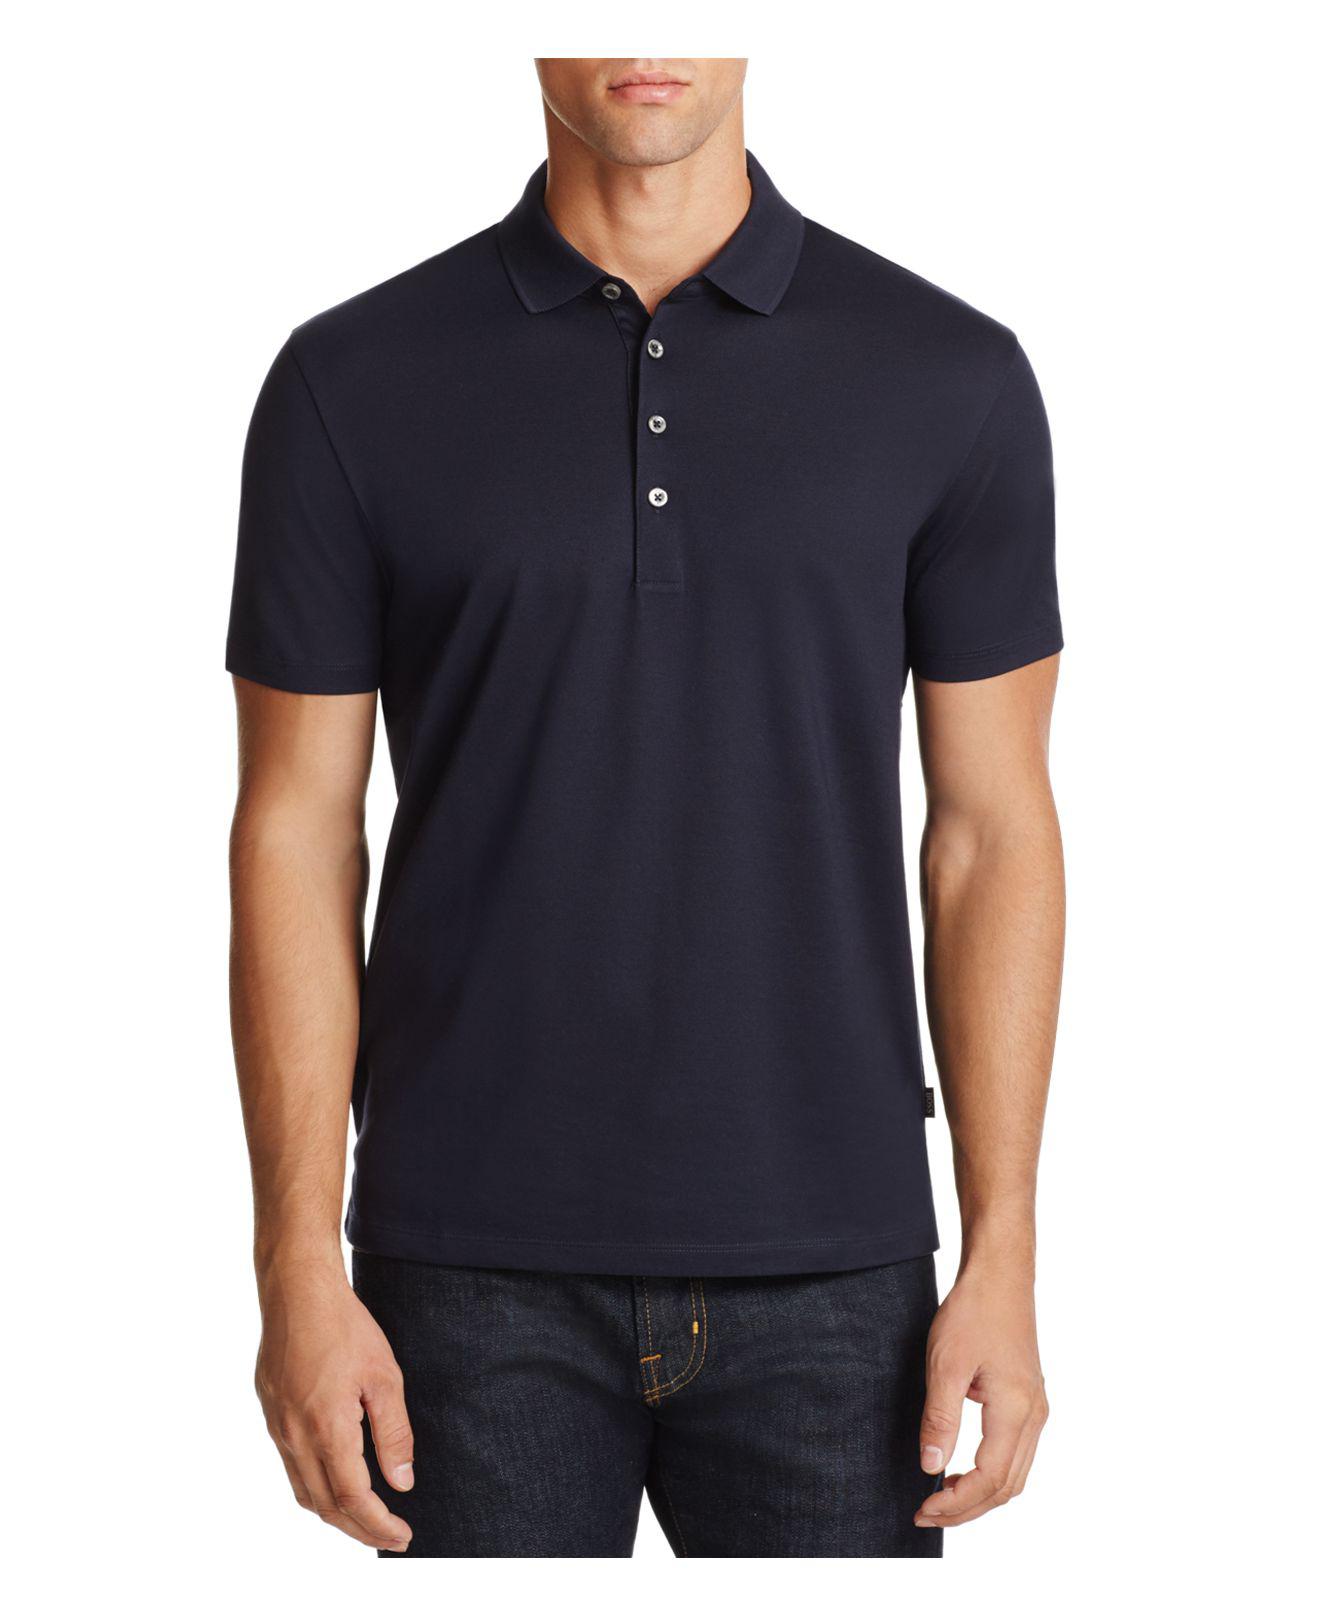 Lyst - Boss Slim Fit Polo Shirt in Blue for Men - Save 48%